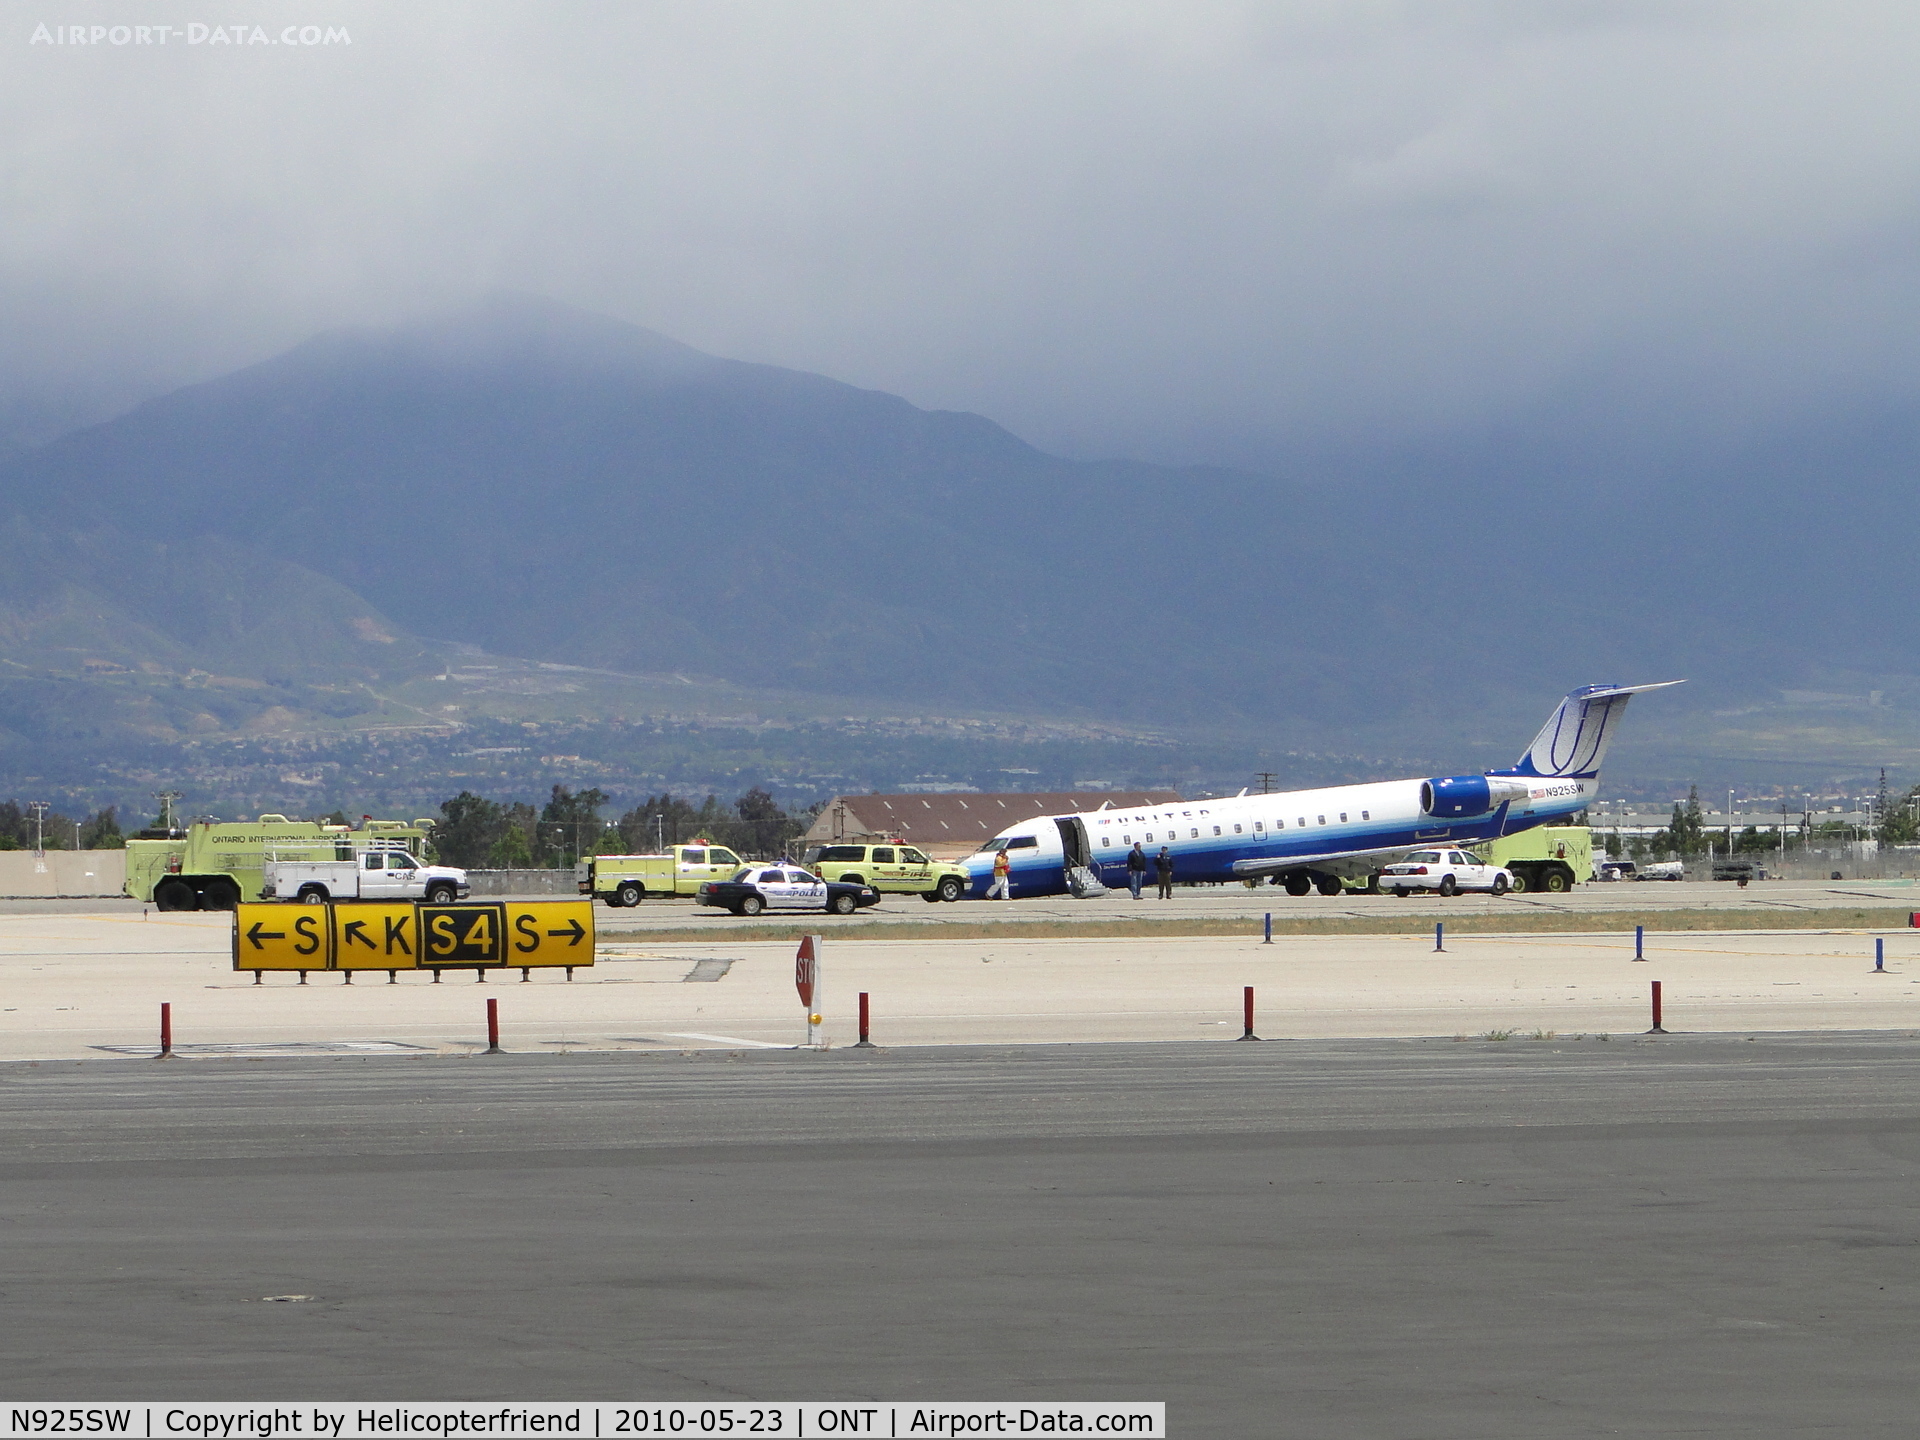 N925SW, 2002 Bombardier CRJ-200LR (CL-600-2B19) C/N 7682, Fire, Police, and Airport personnel surveying the Sky West, United Connection aircraft incident on runway 26L